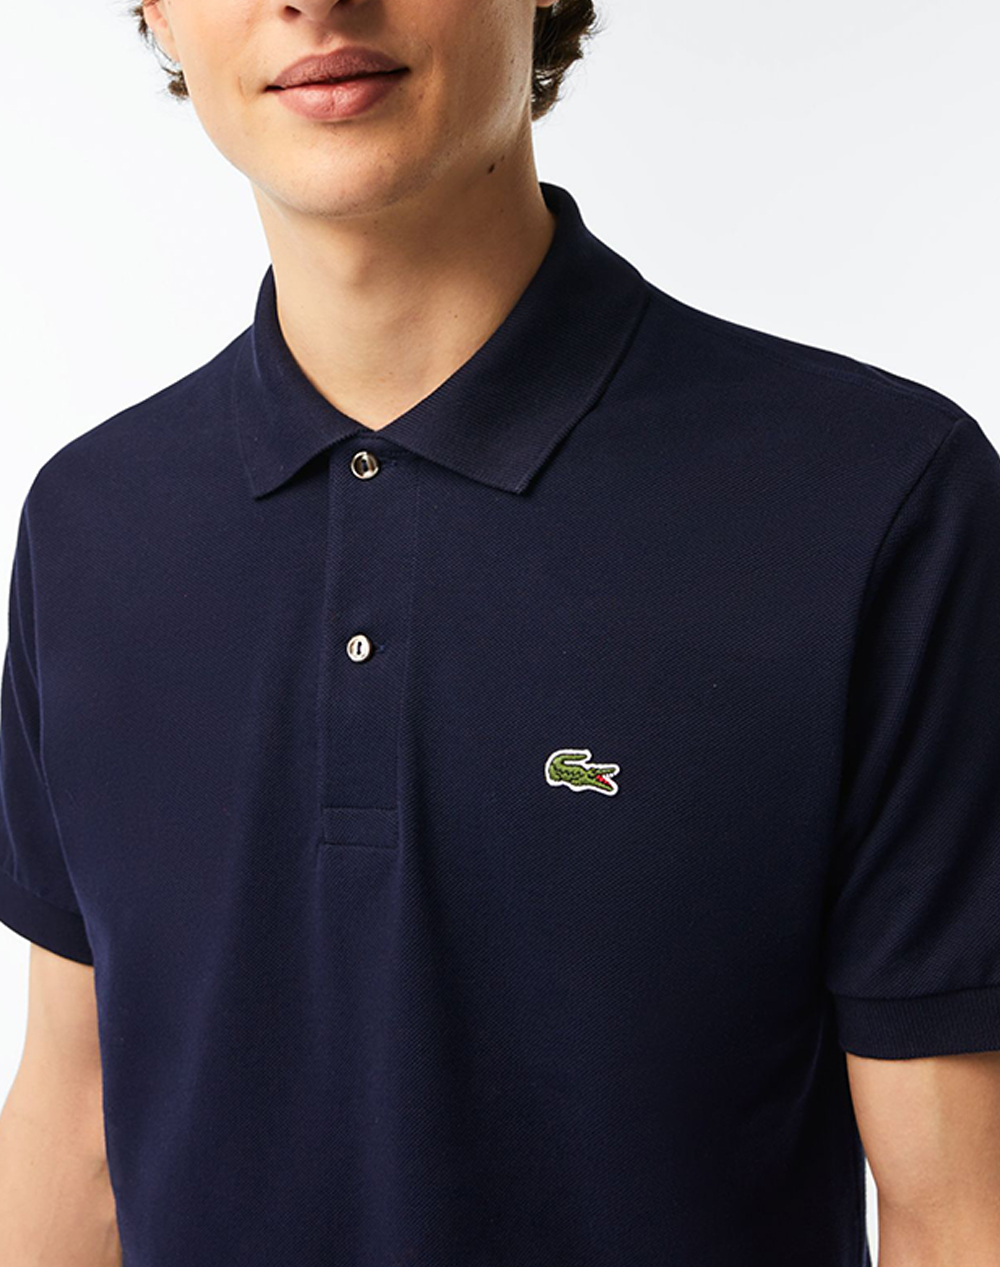 LACOSTE ΜΠΛΟΥΖΑ ΚΜ POLO SS